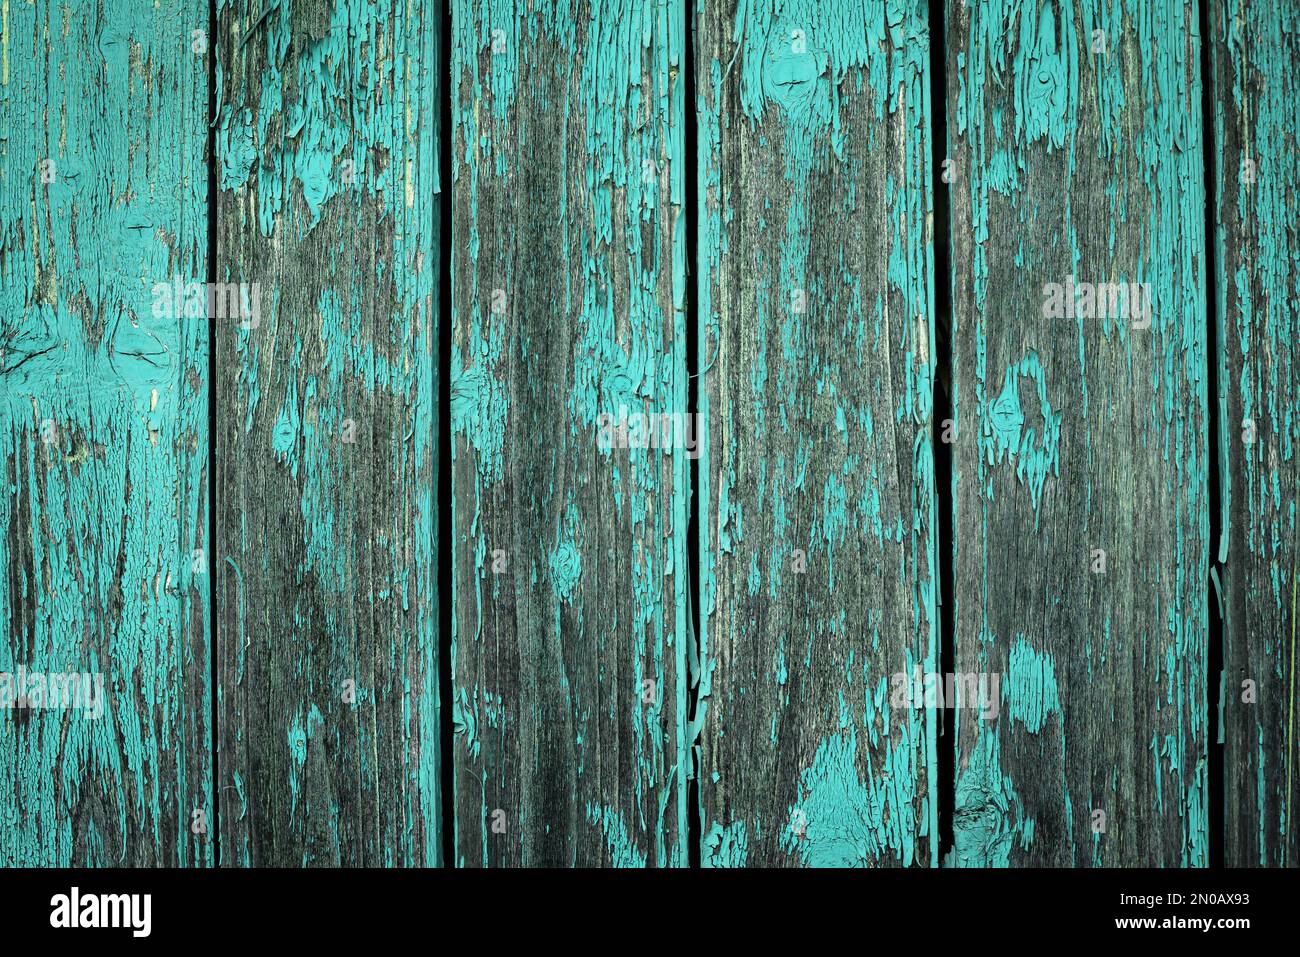 Old natural weathered wooden planks with cracked blue paint background Stock Photo